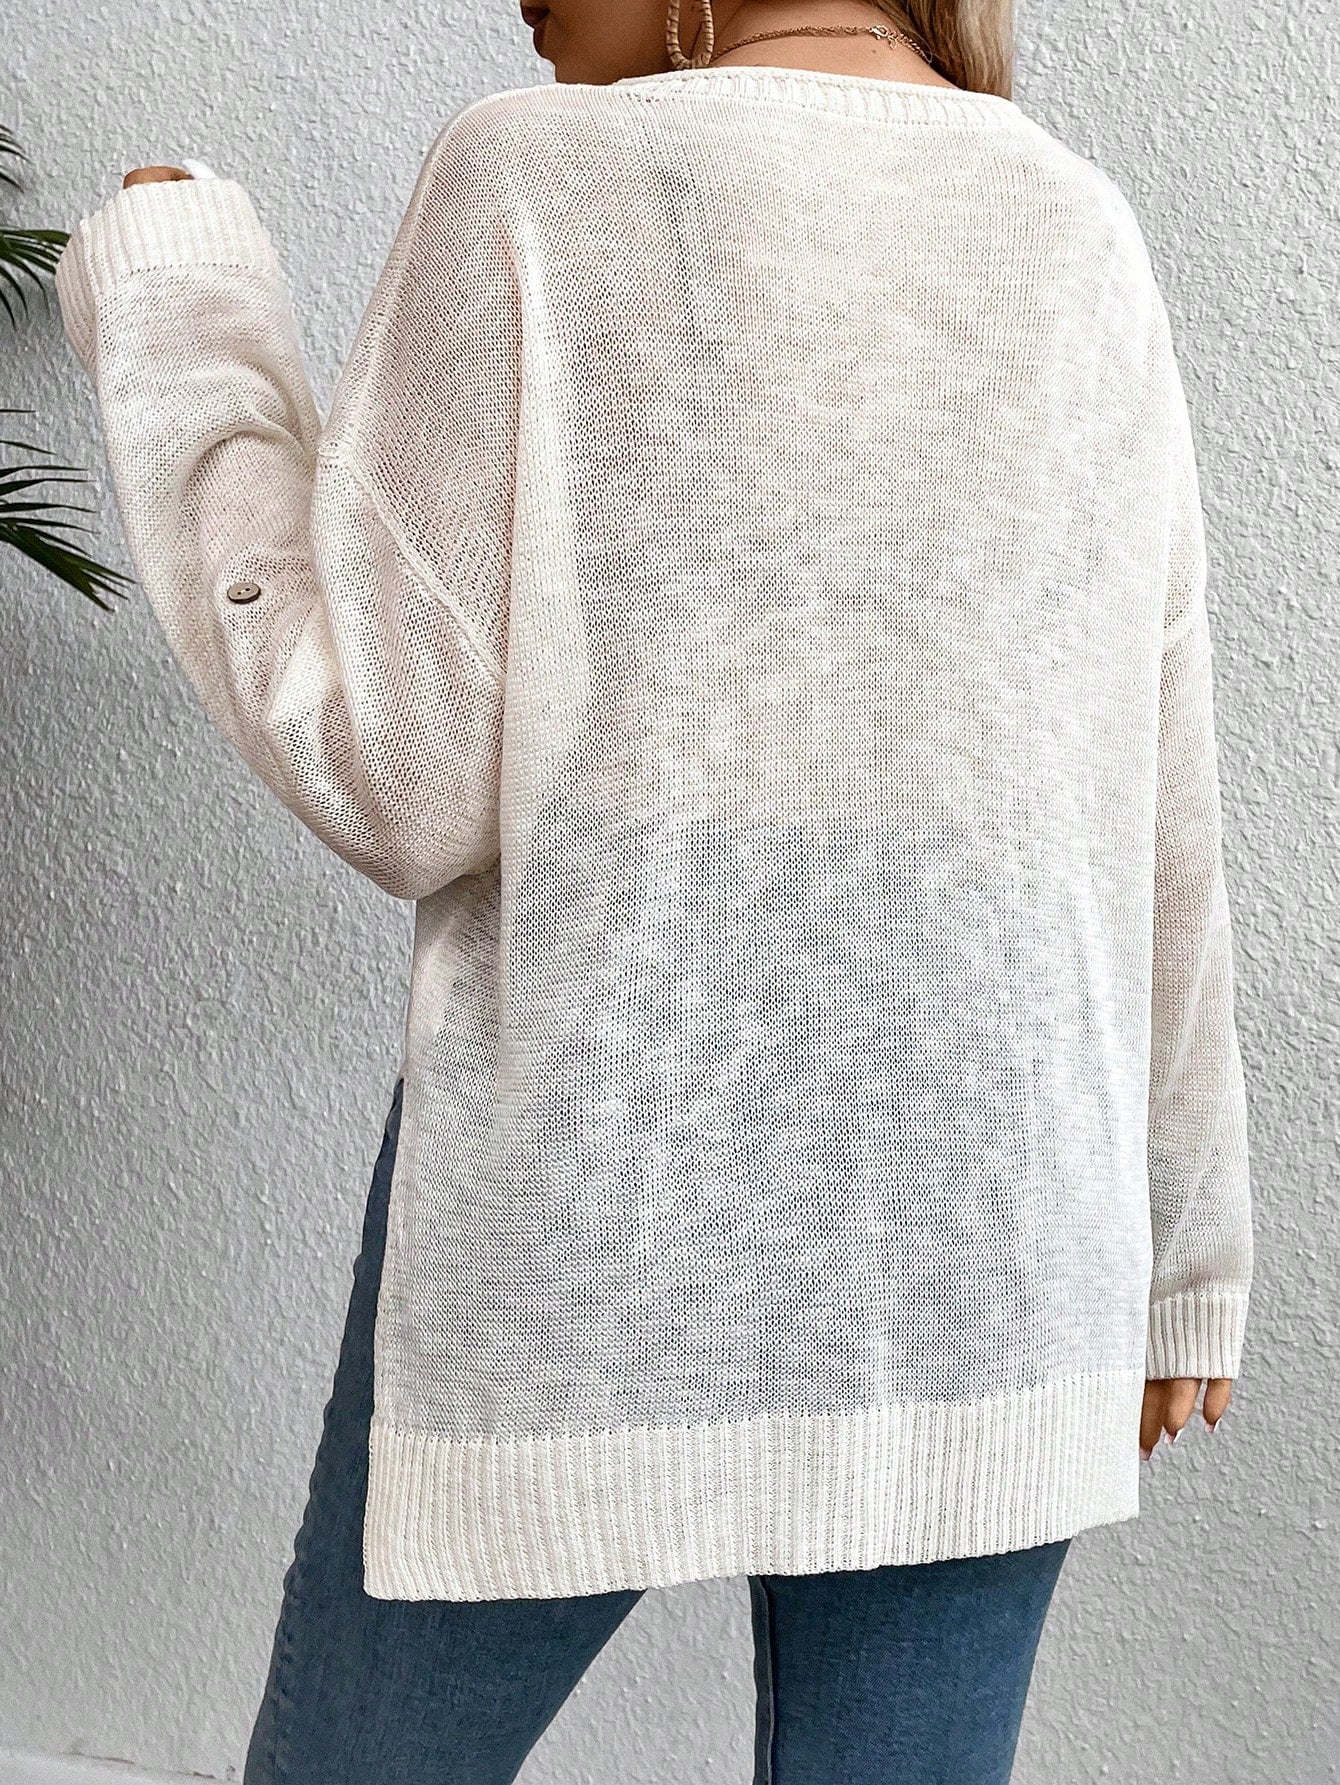 Women's V-Neck Sweater With Flare Sleeve And Rolled Edge